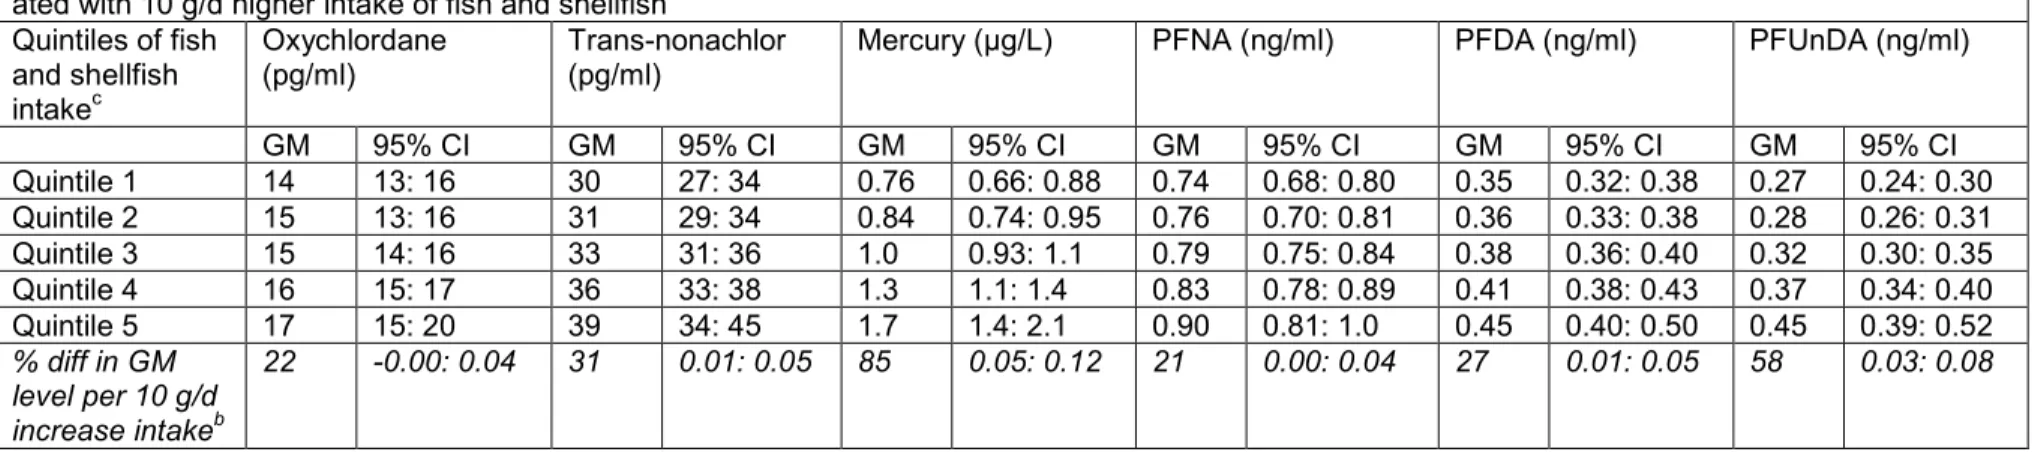 Table 4. Geometric mean (GM) levels of certain contaminants per quintile of fish and shellfish intake  a  and percentage difference in GM levels associ- associ-ated with 10 g/d higher intake of fish and shellfish b